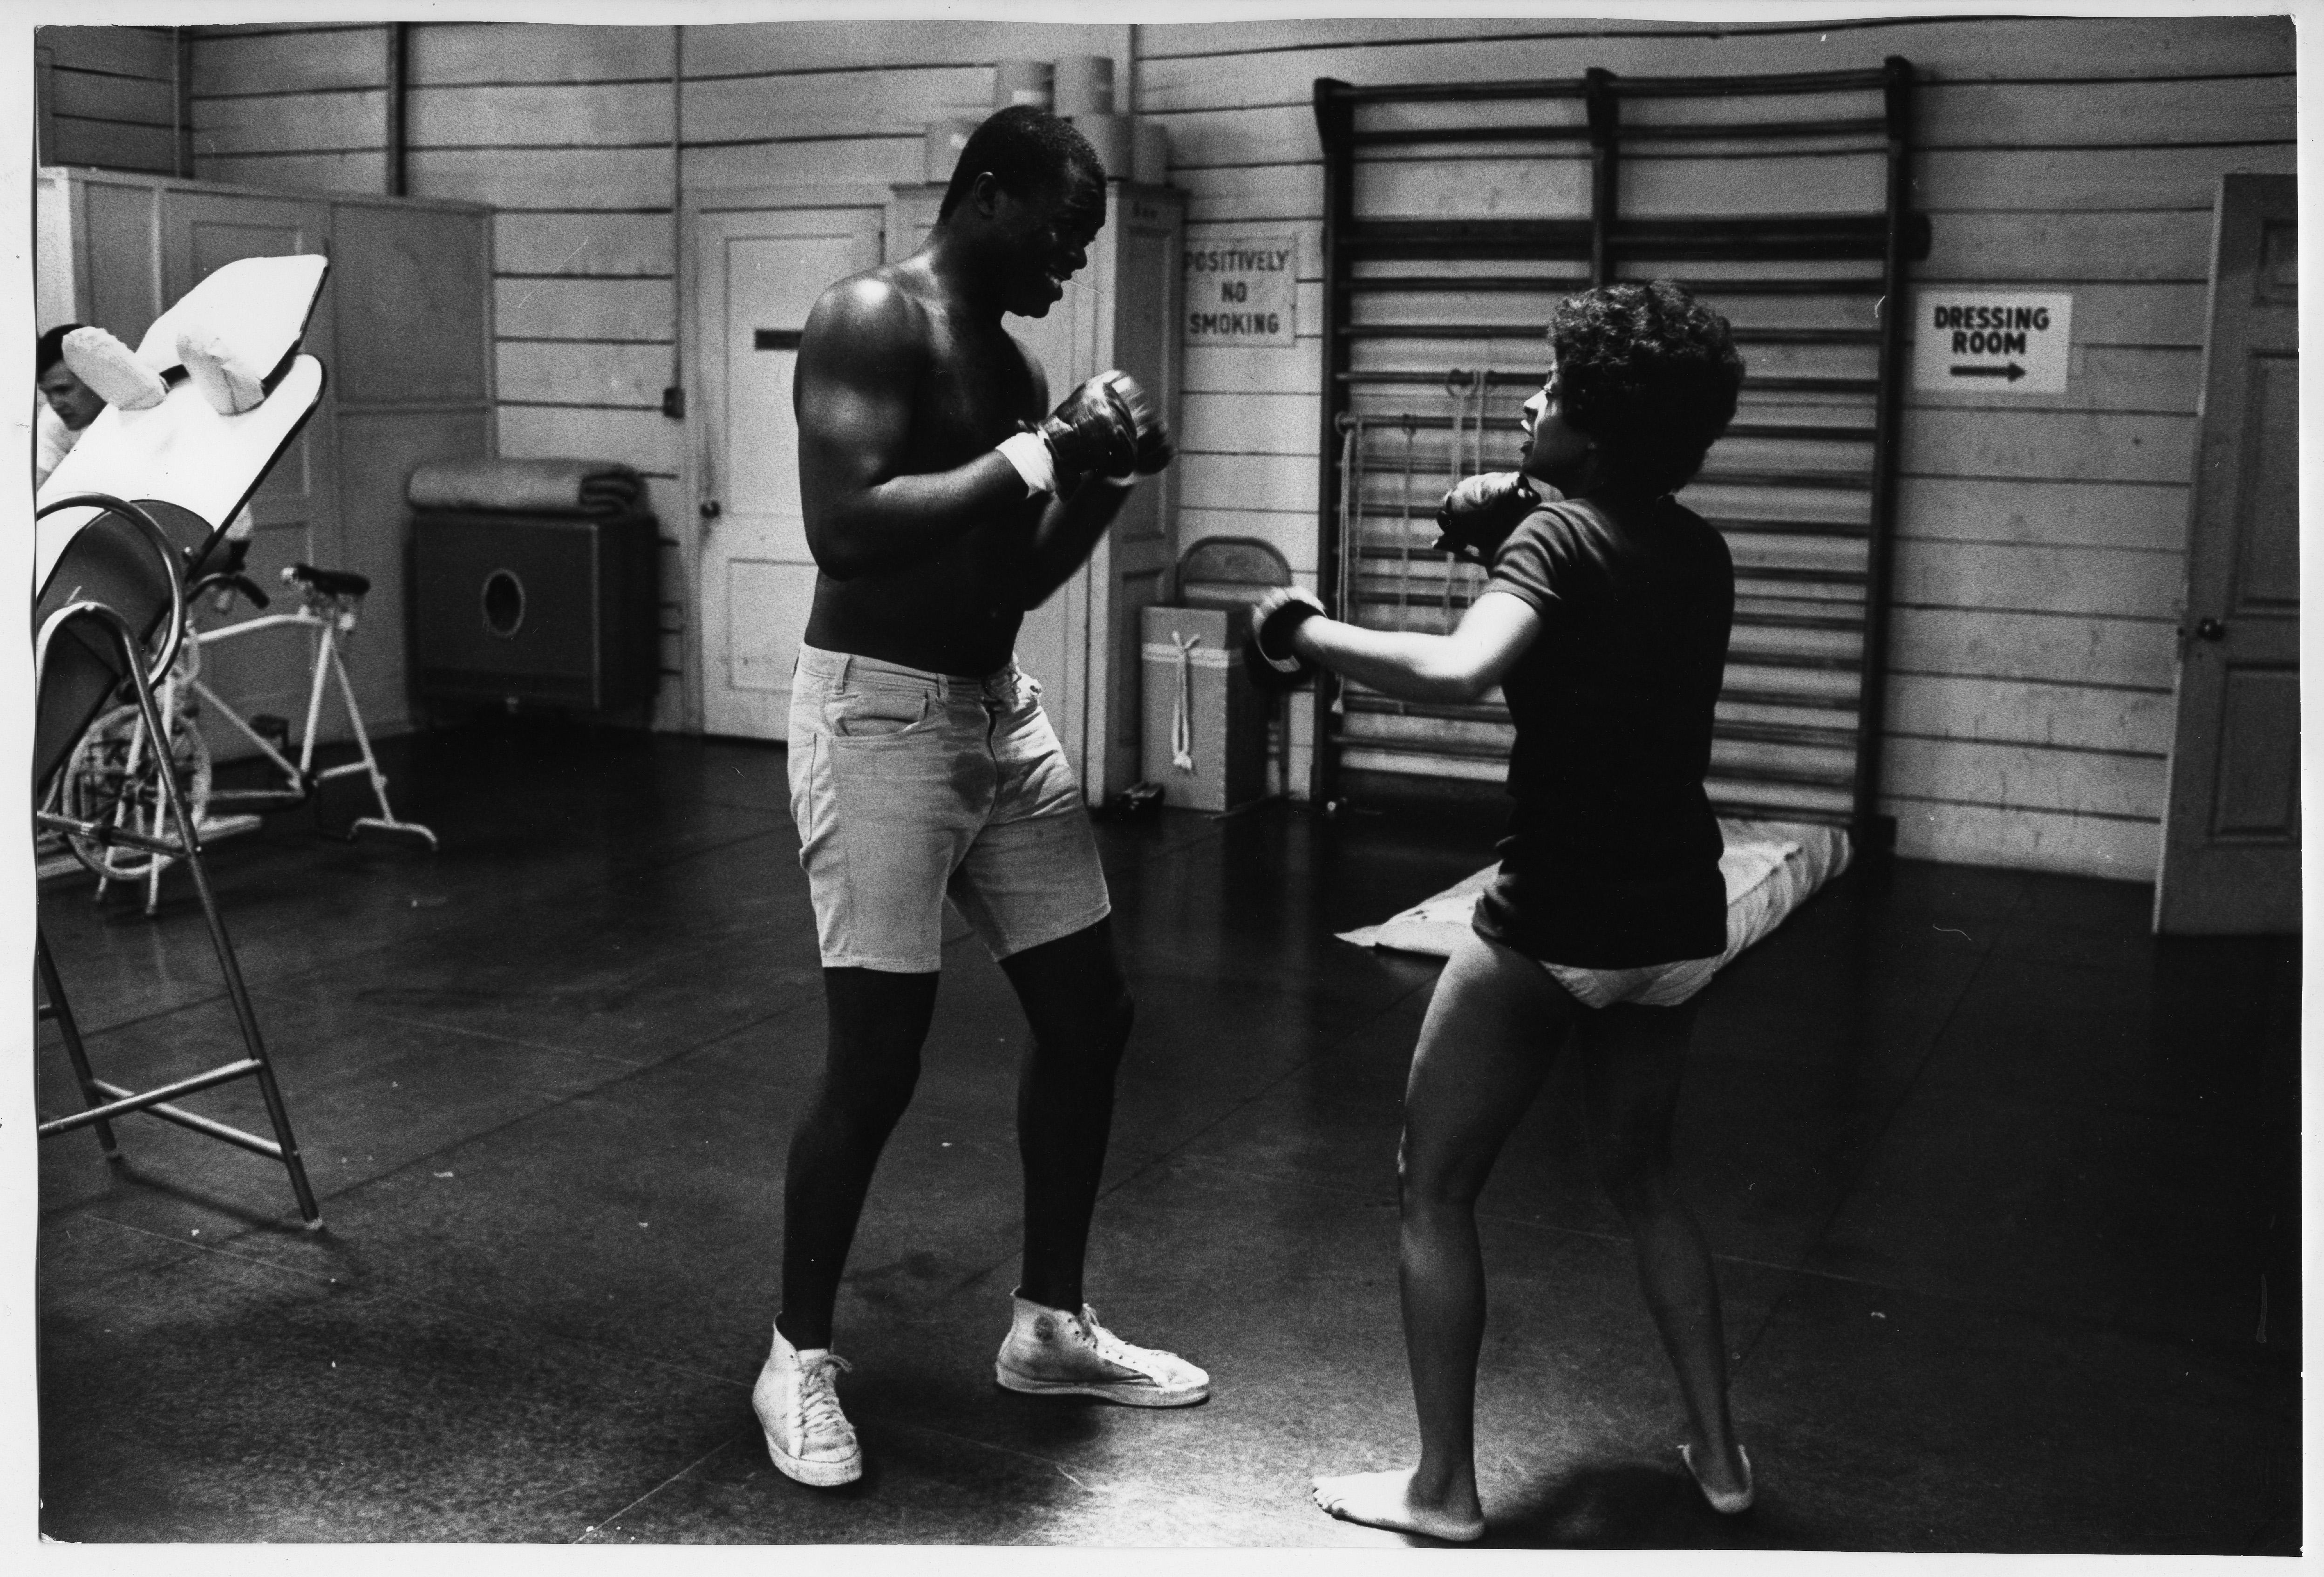 Lola Falana boxing in the gym photographed by Frank Dandridge, 1969.